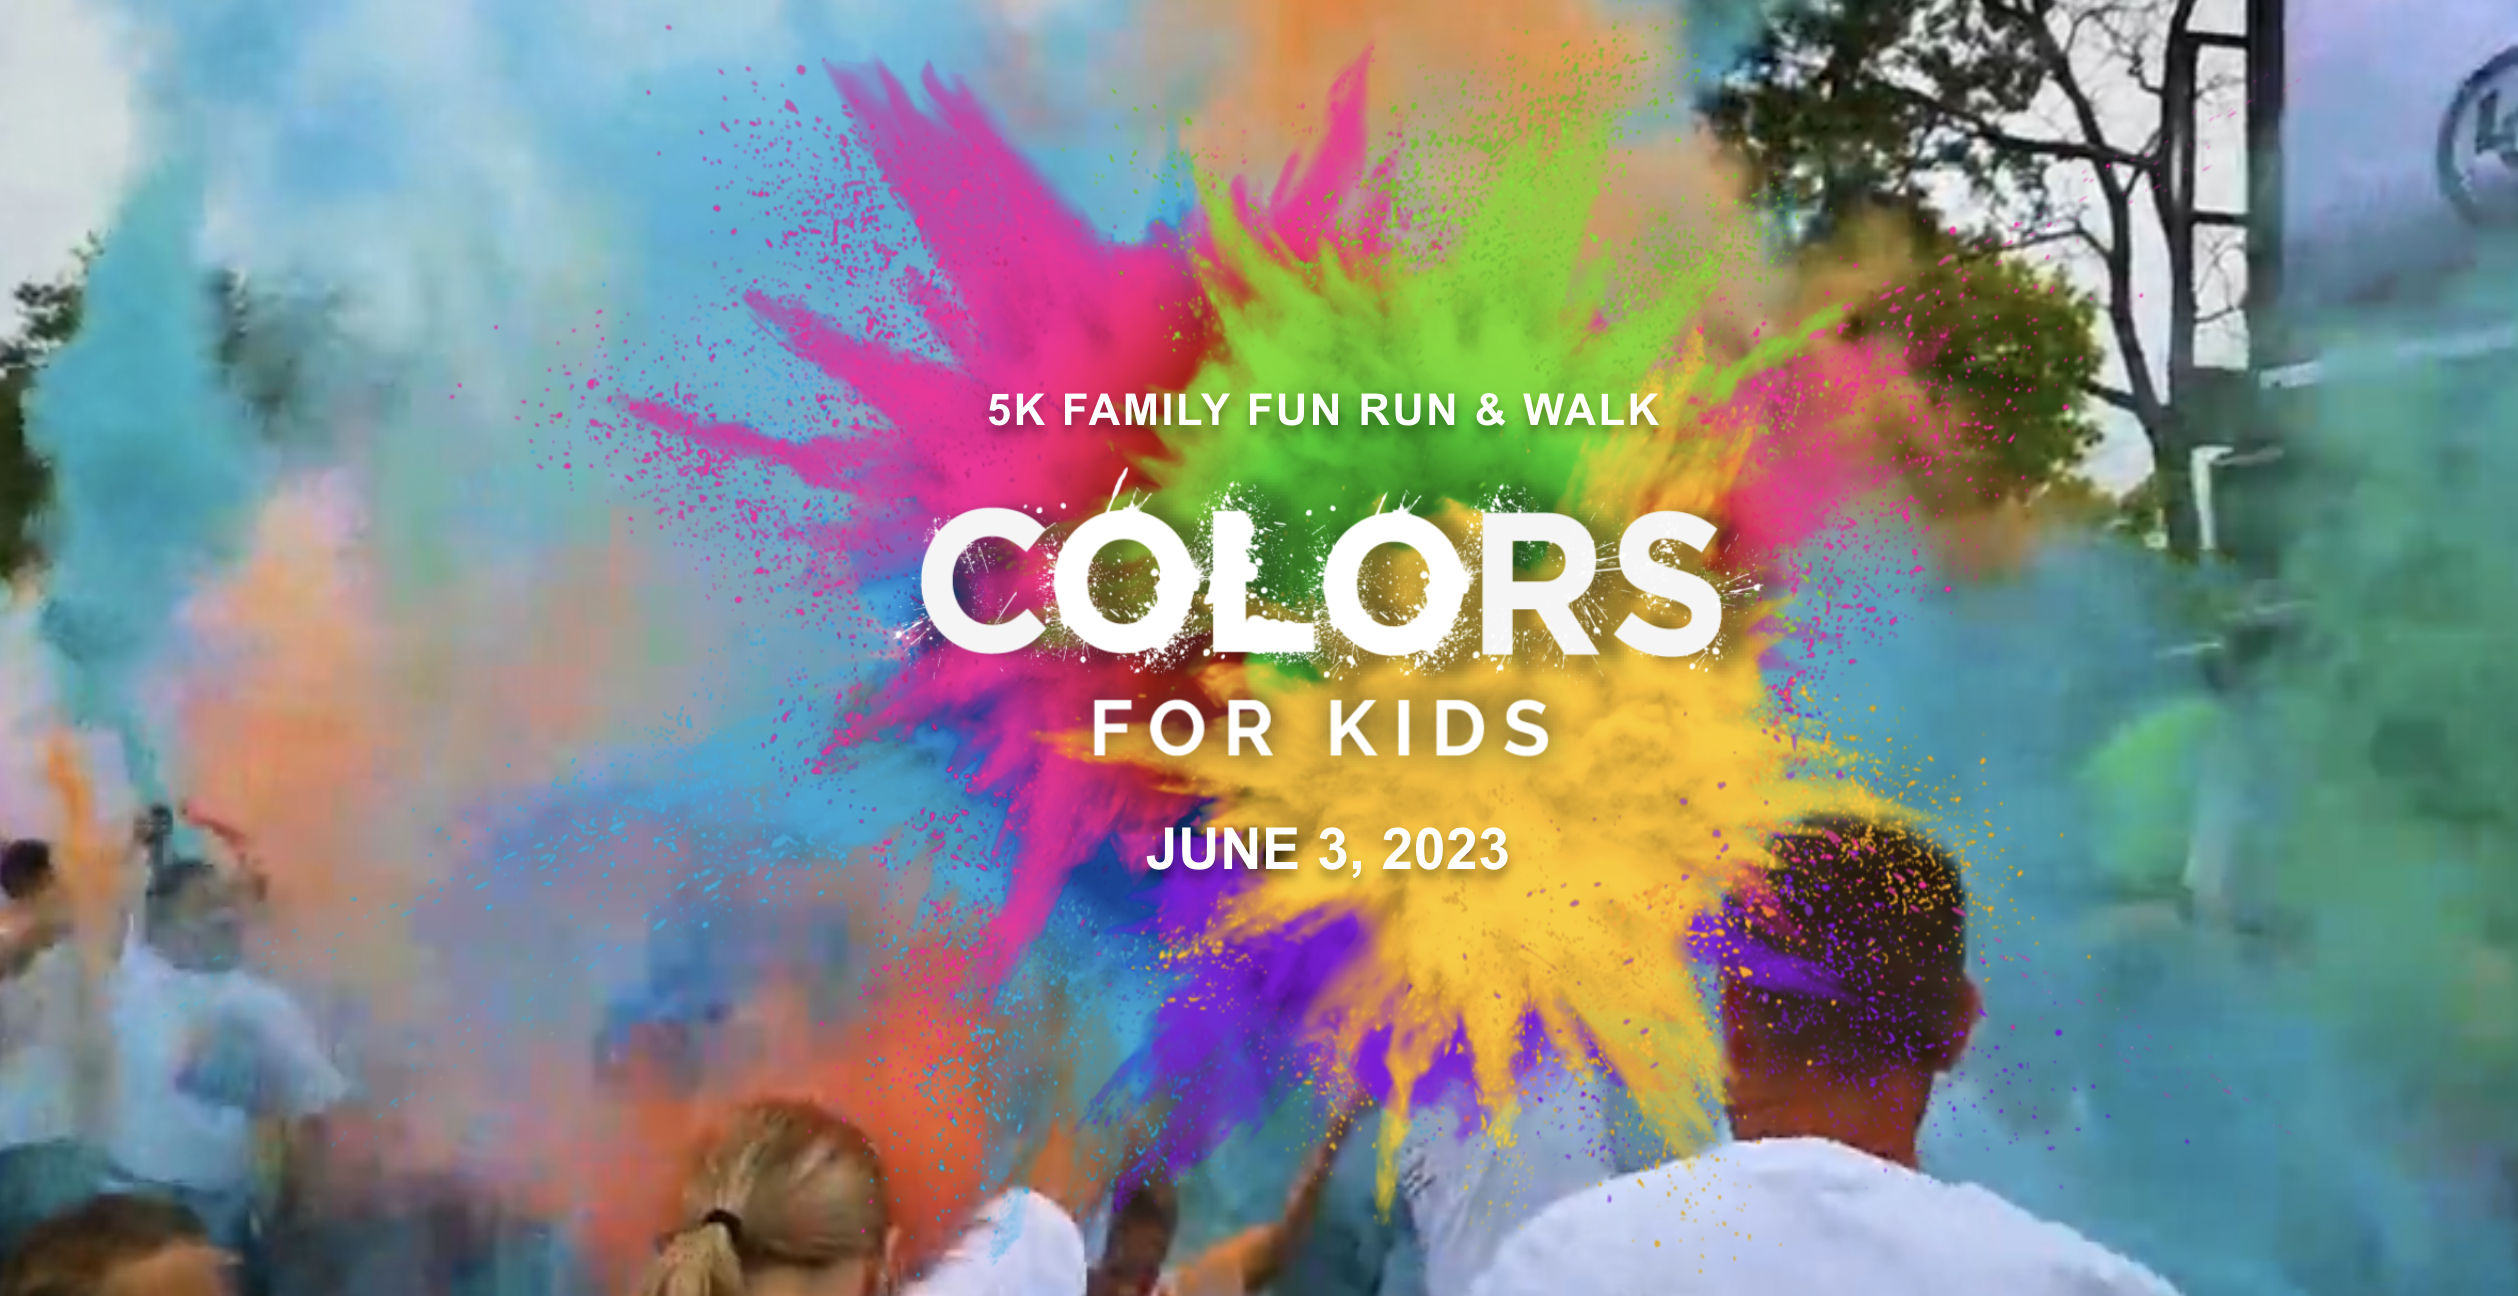 Alliance RV, Lippert to Present “Color for Kids’ Event